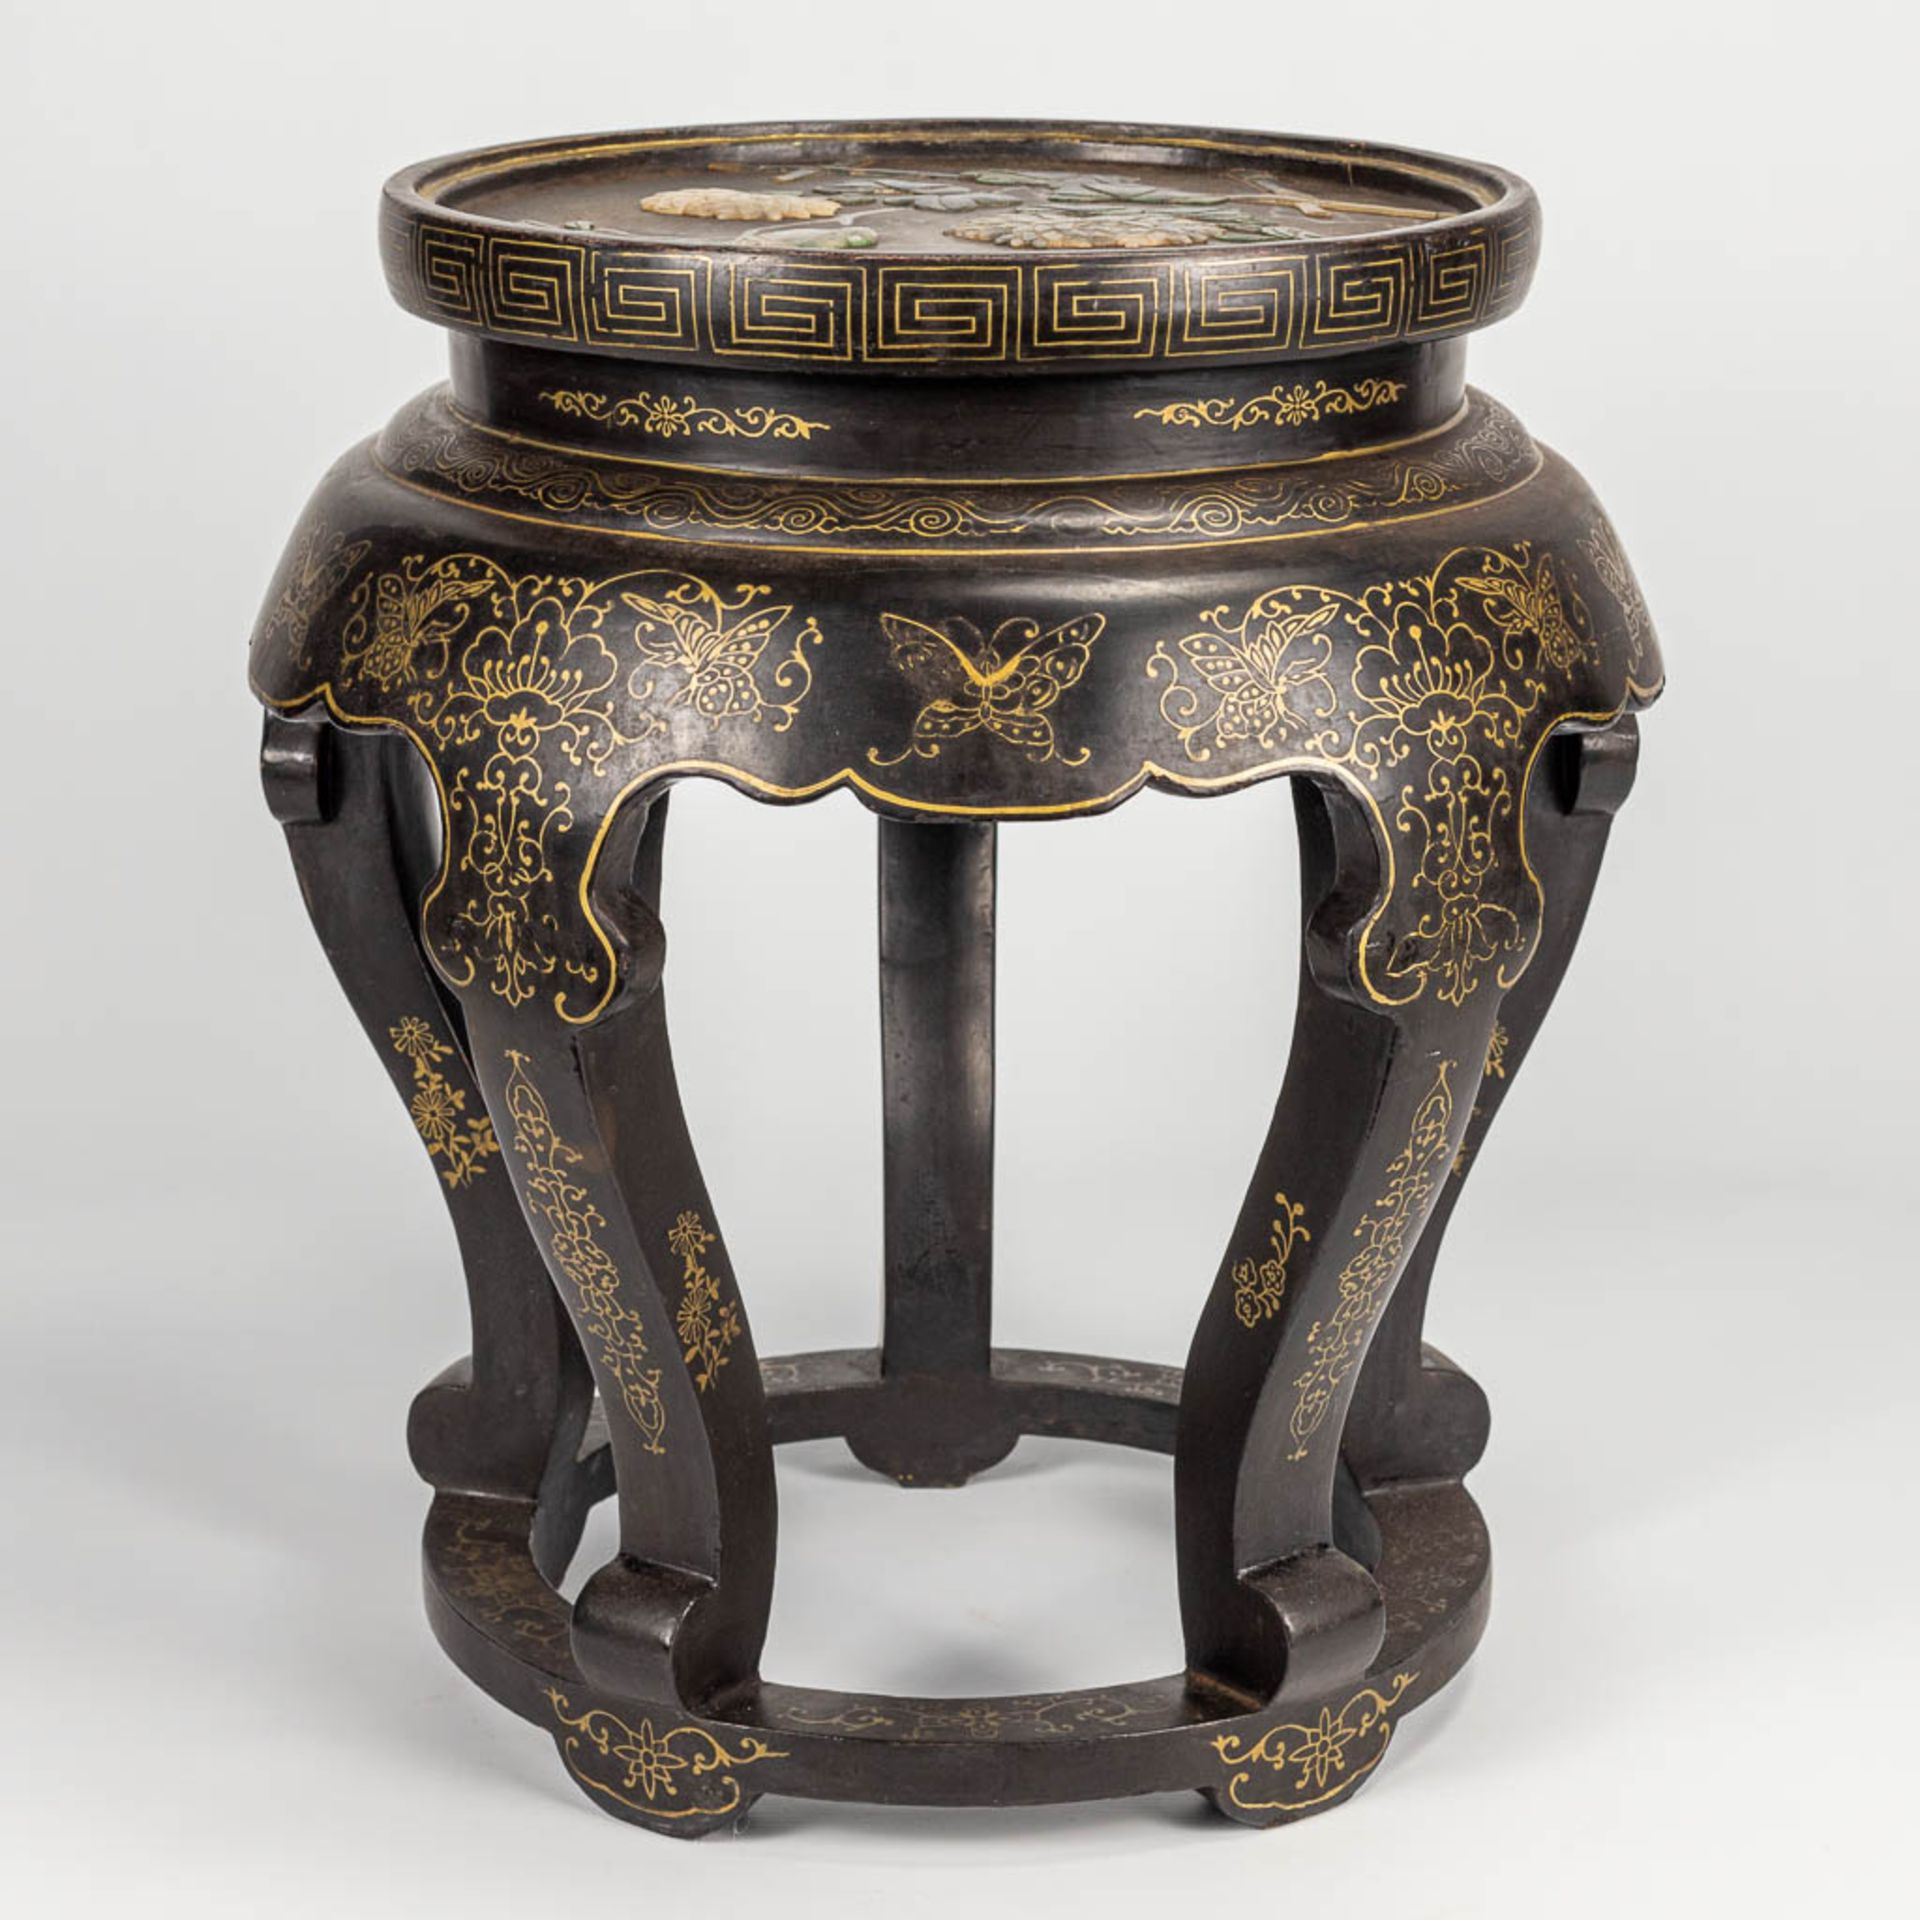 A side table made of hardwood and inlaid with Chinese hardstone - Image 5 of 10